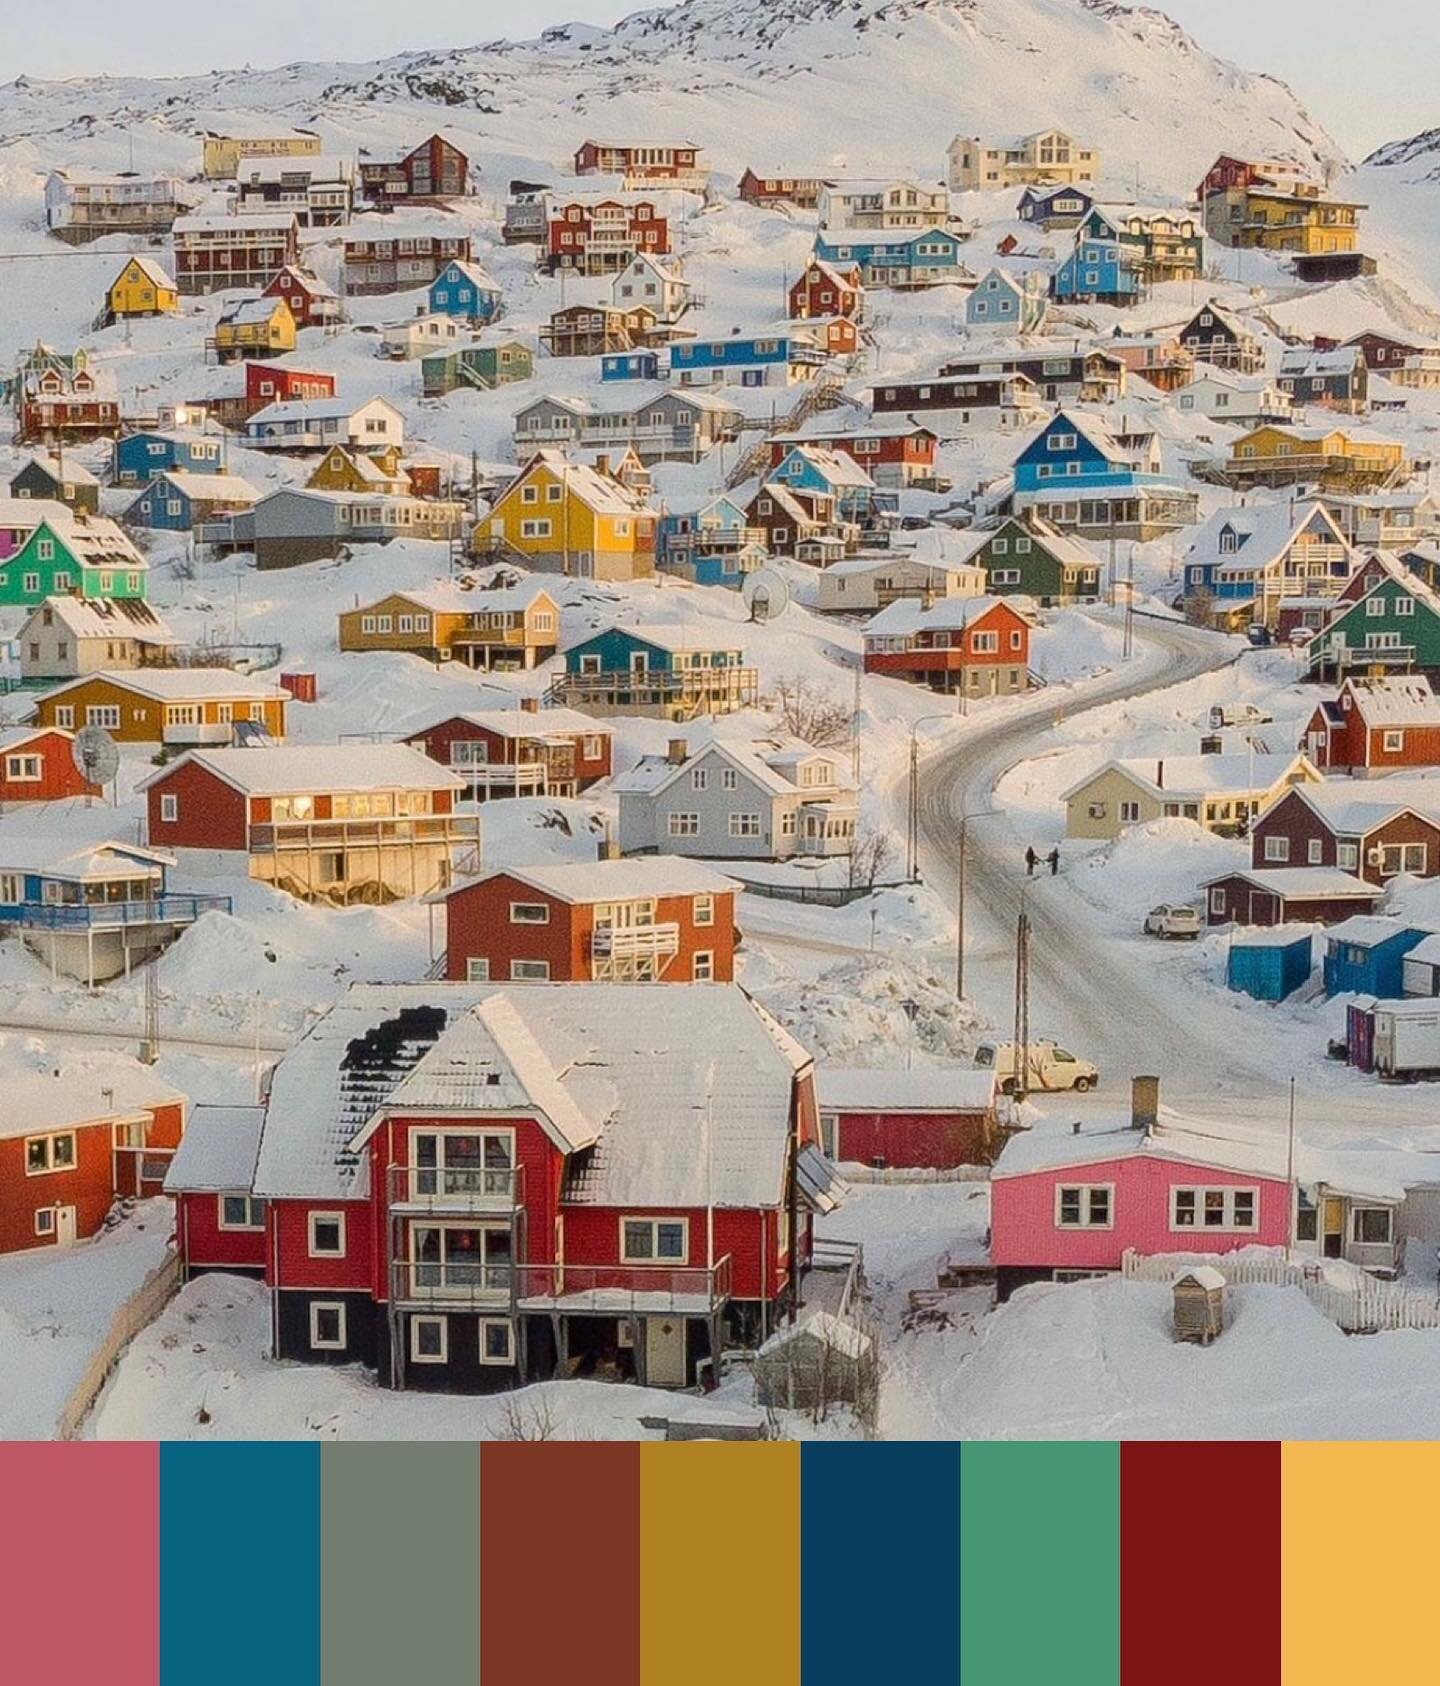 Houses in Greenland like sprinkles.
#colorpalette #greenland #greenlandclture #artdirection #productiondesign #accidentallywesanderson